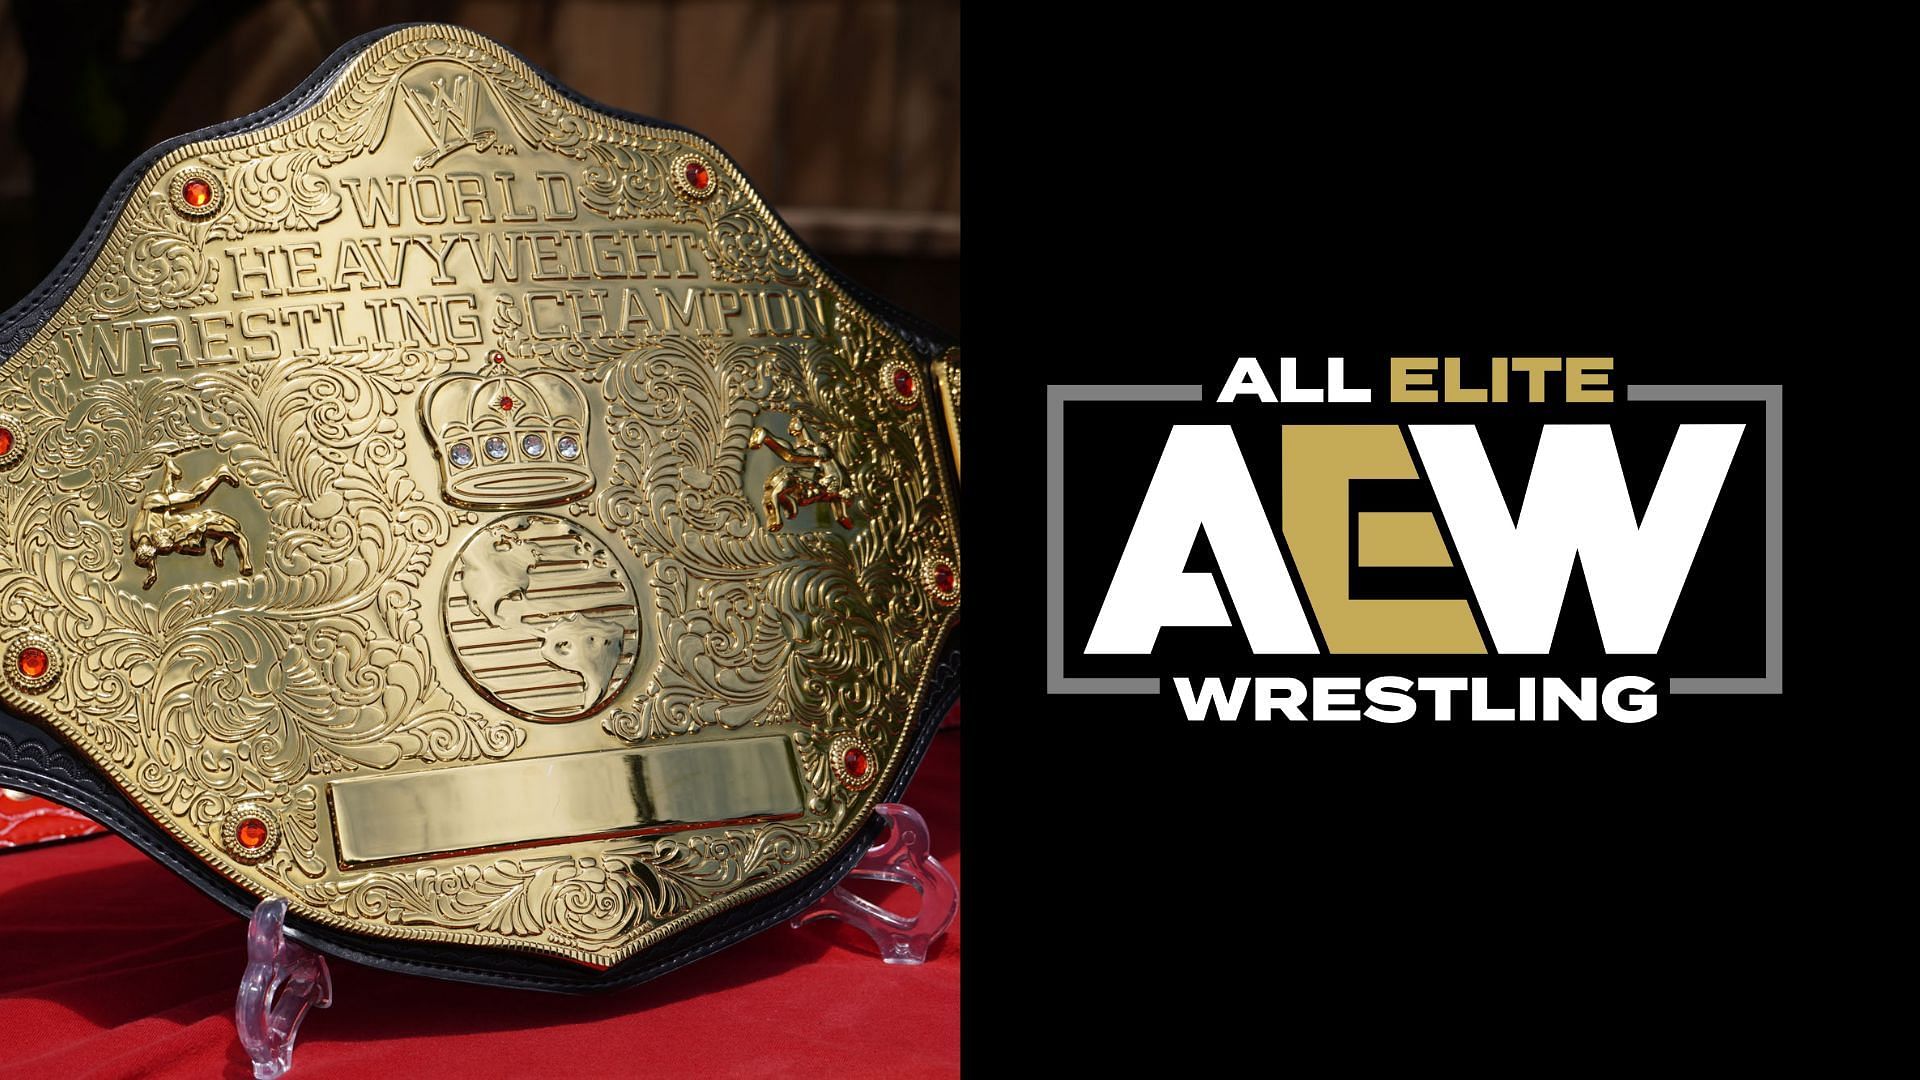 Former WWE World Champion could possibly show up in AEW soon